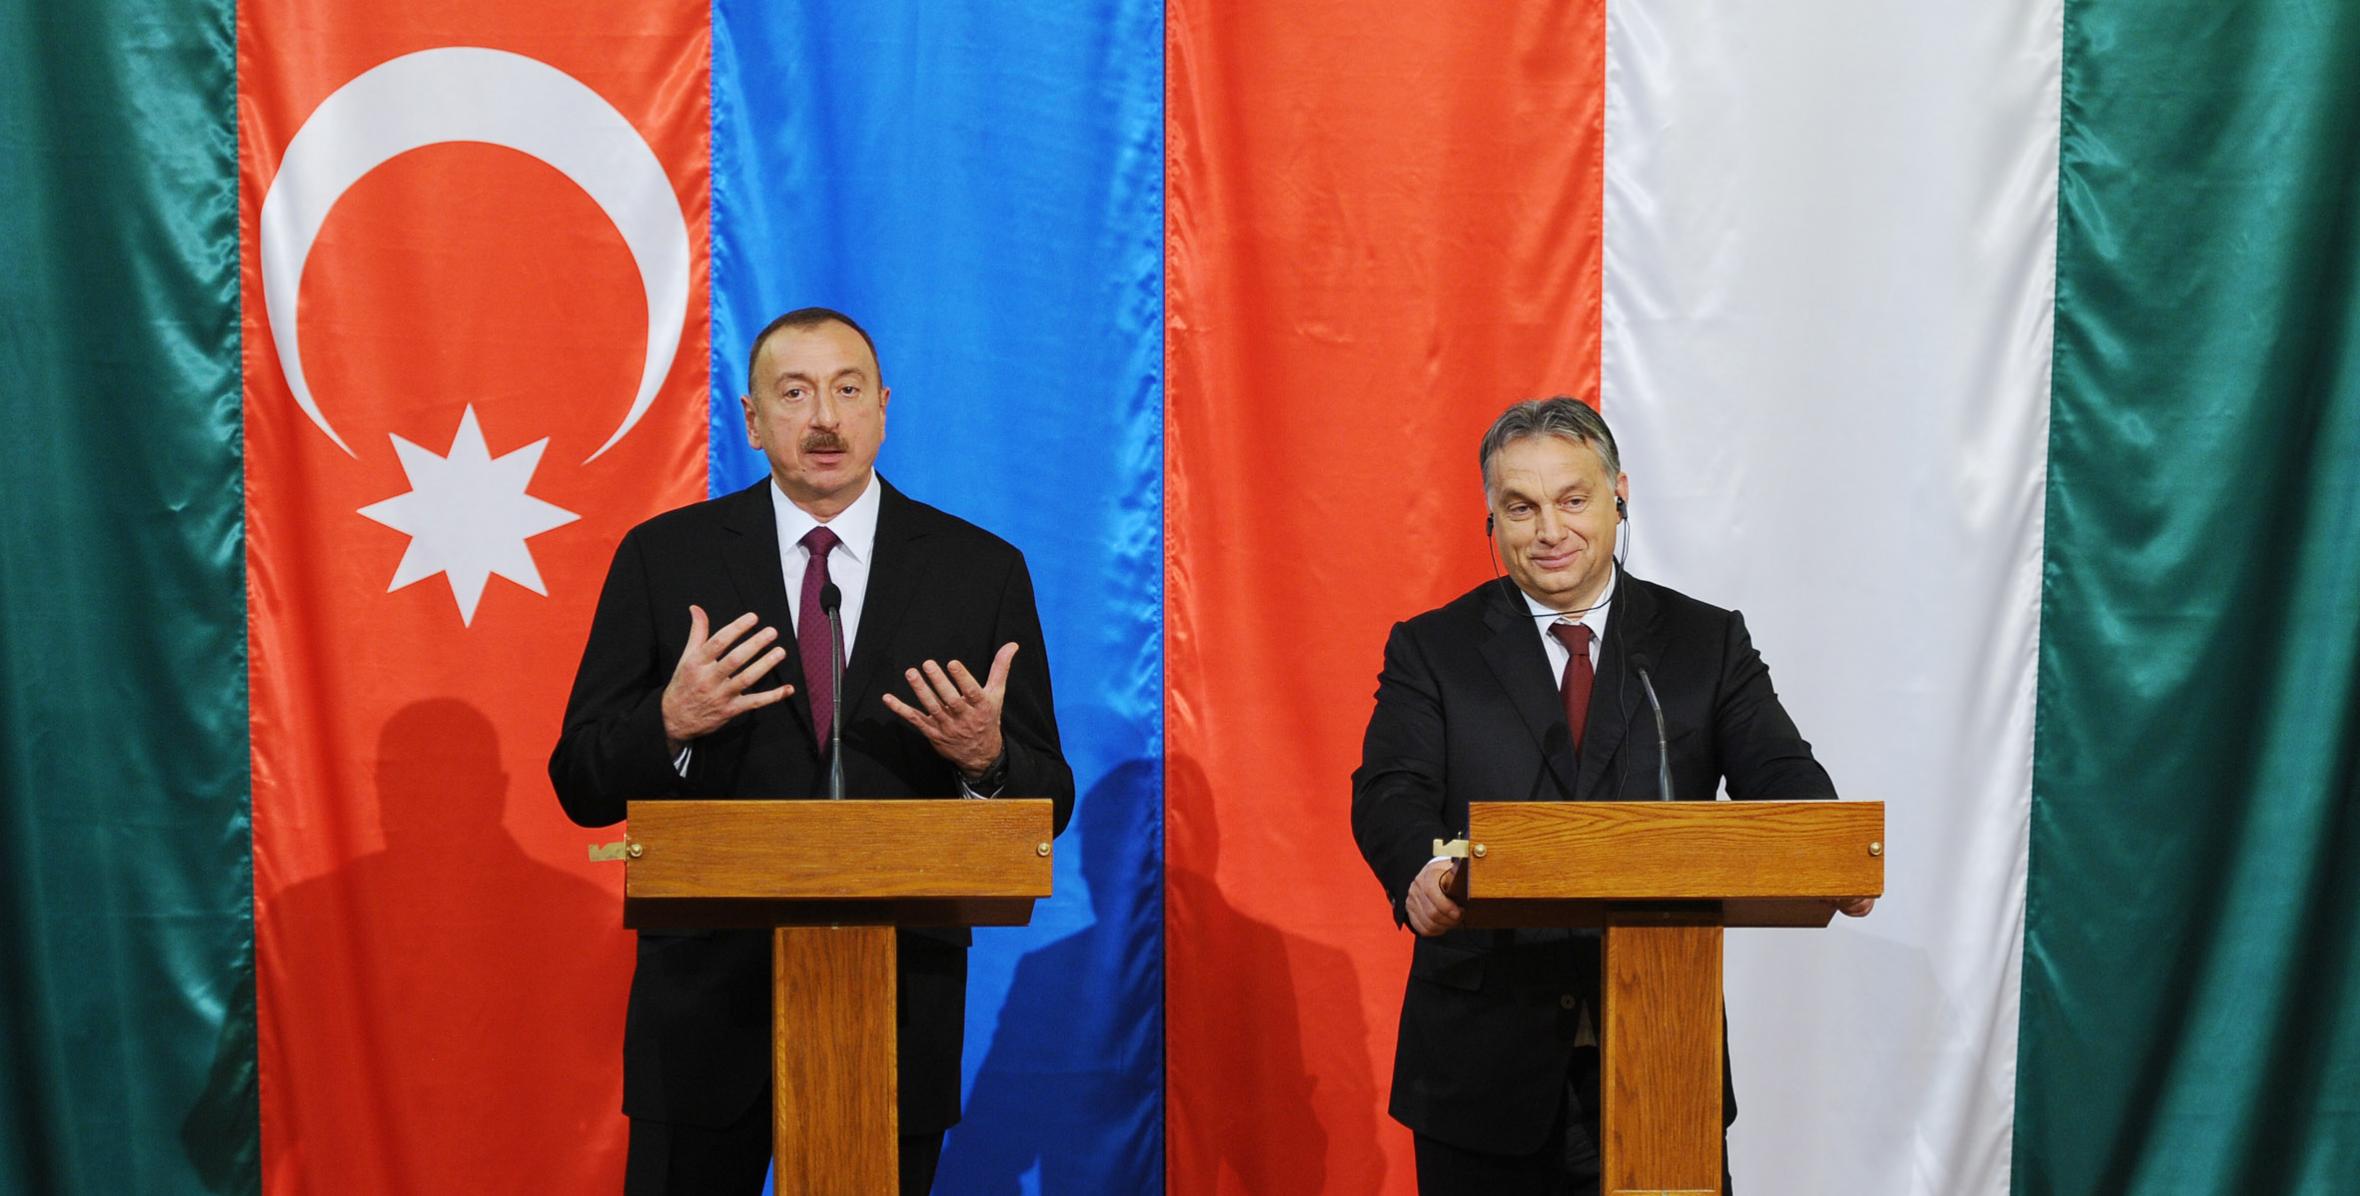 Ilham Aliyev and Hungarian Prime Minister Viktor Orban made statements for the press